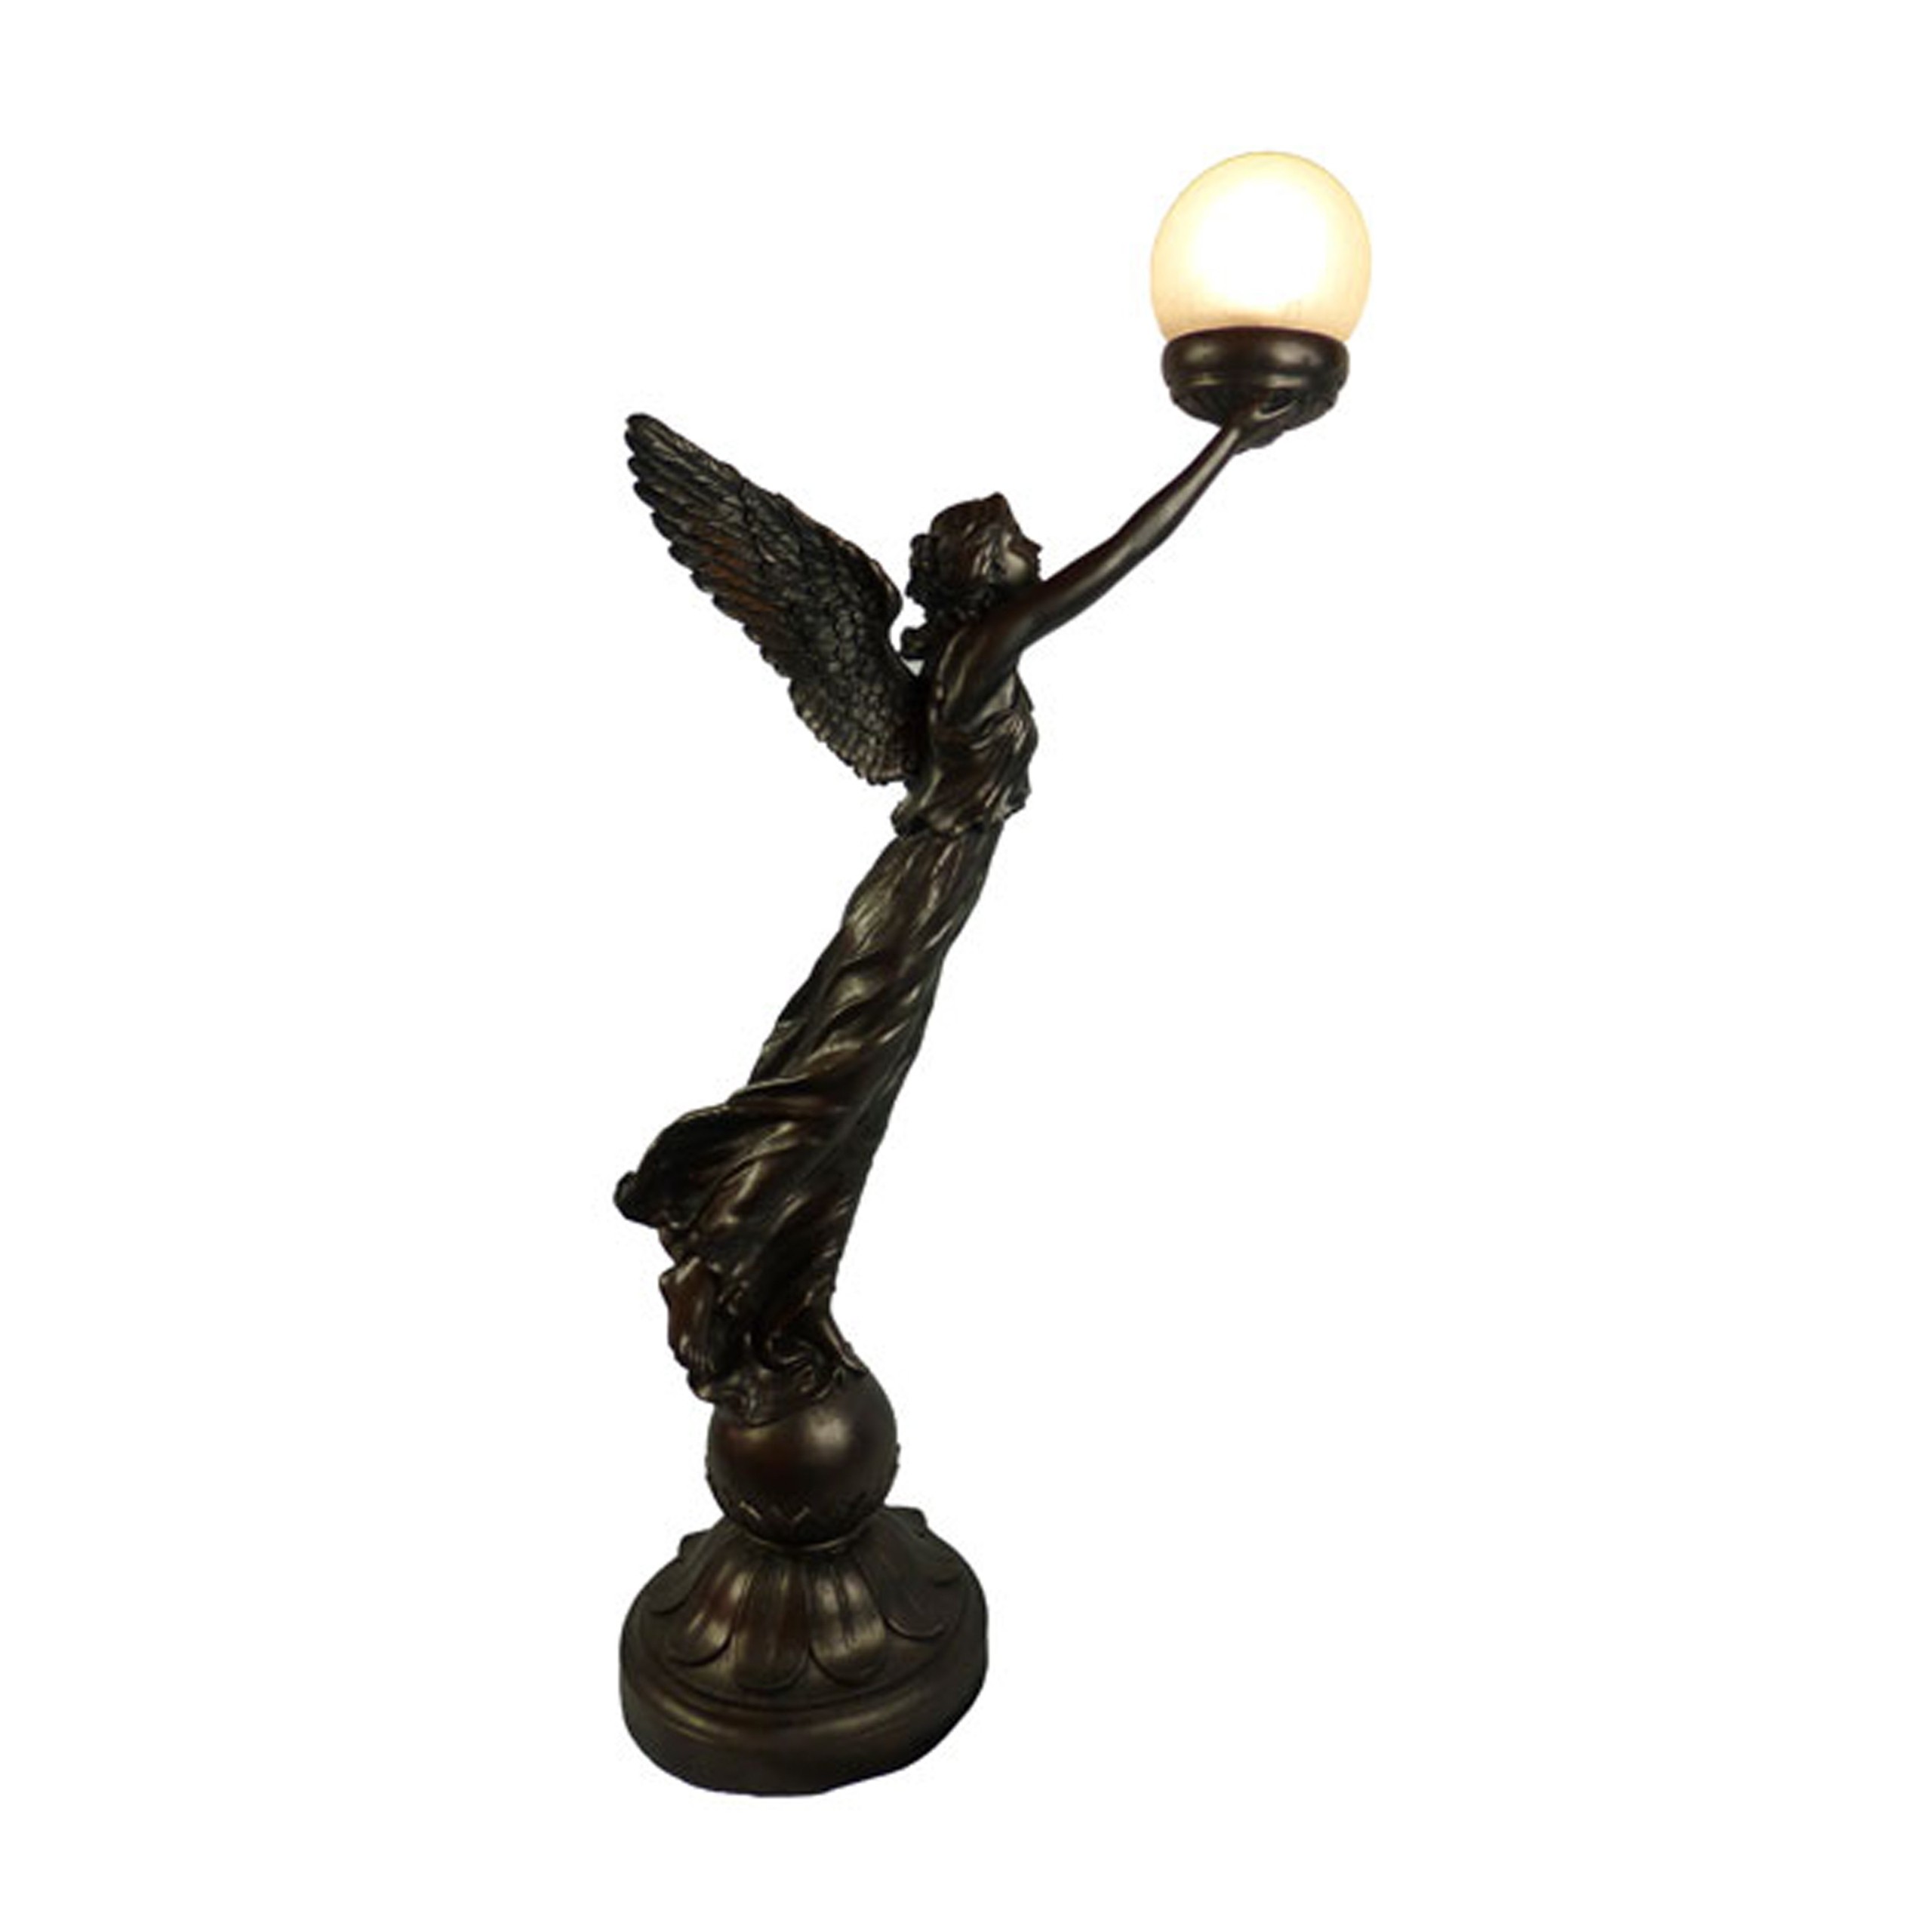 Art deco winged angel table lamp tla pl023 clrckle local